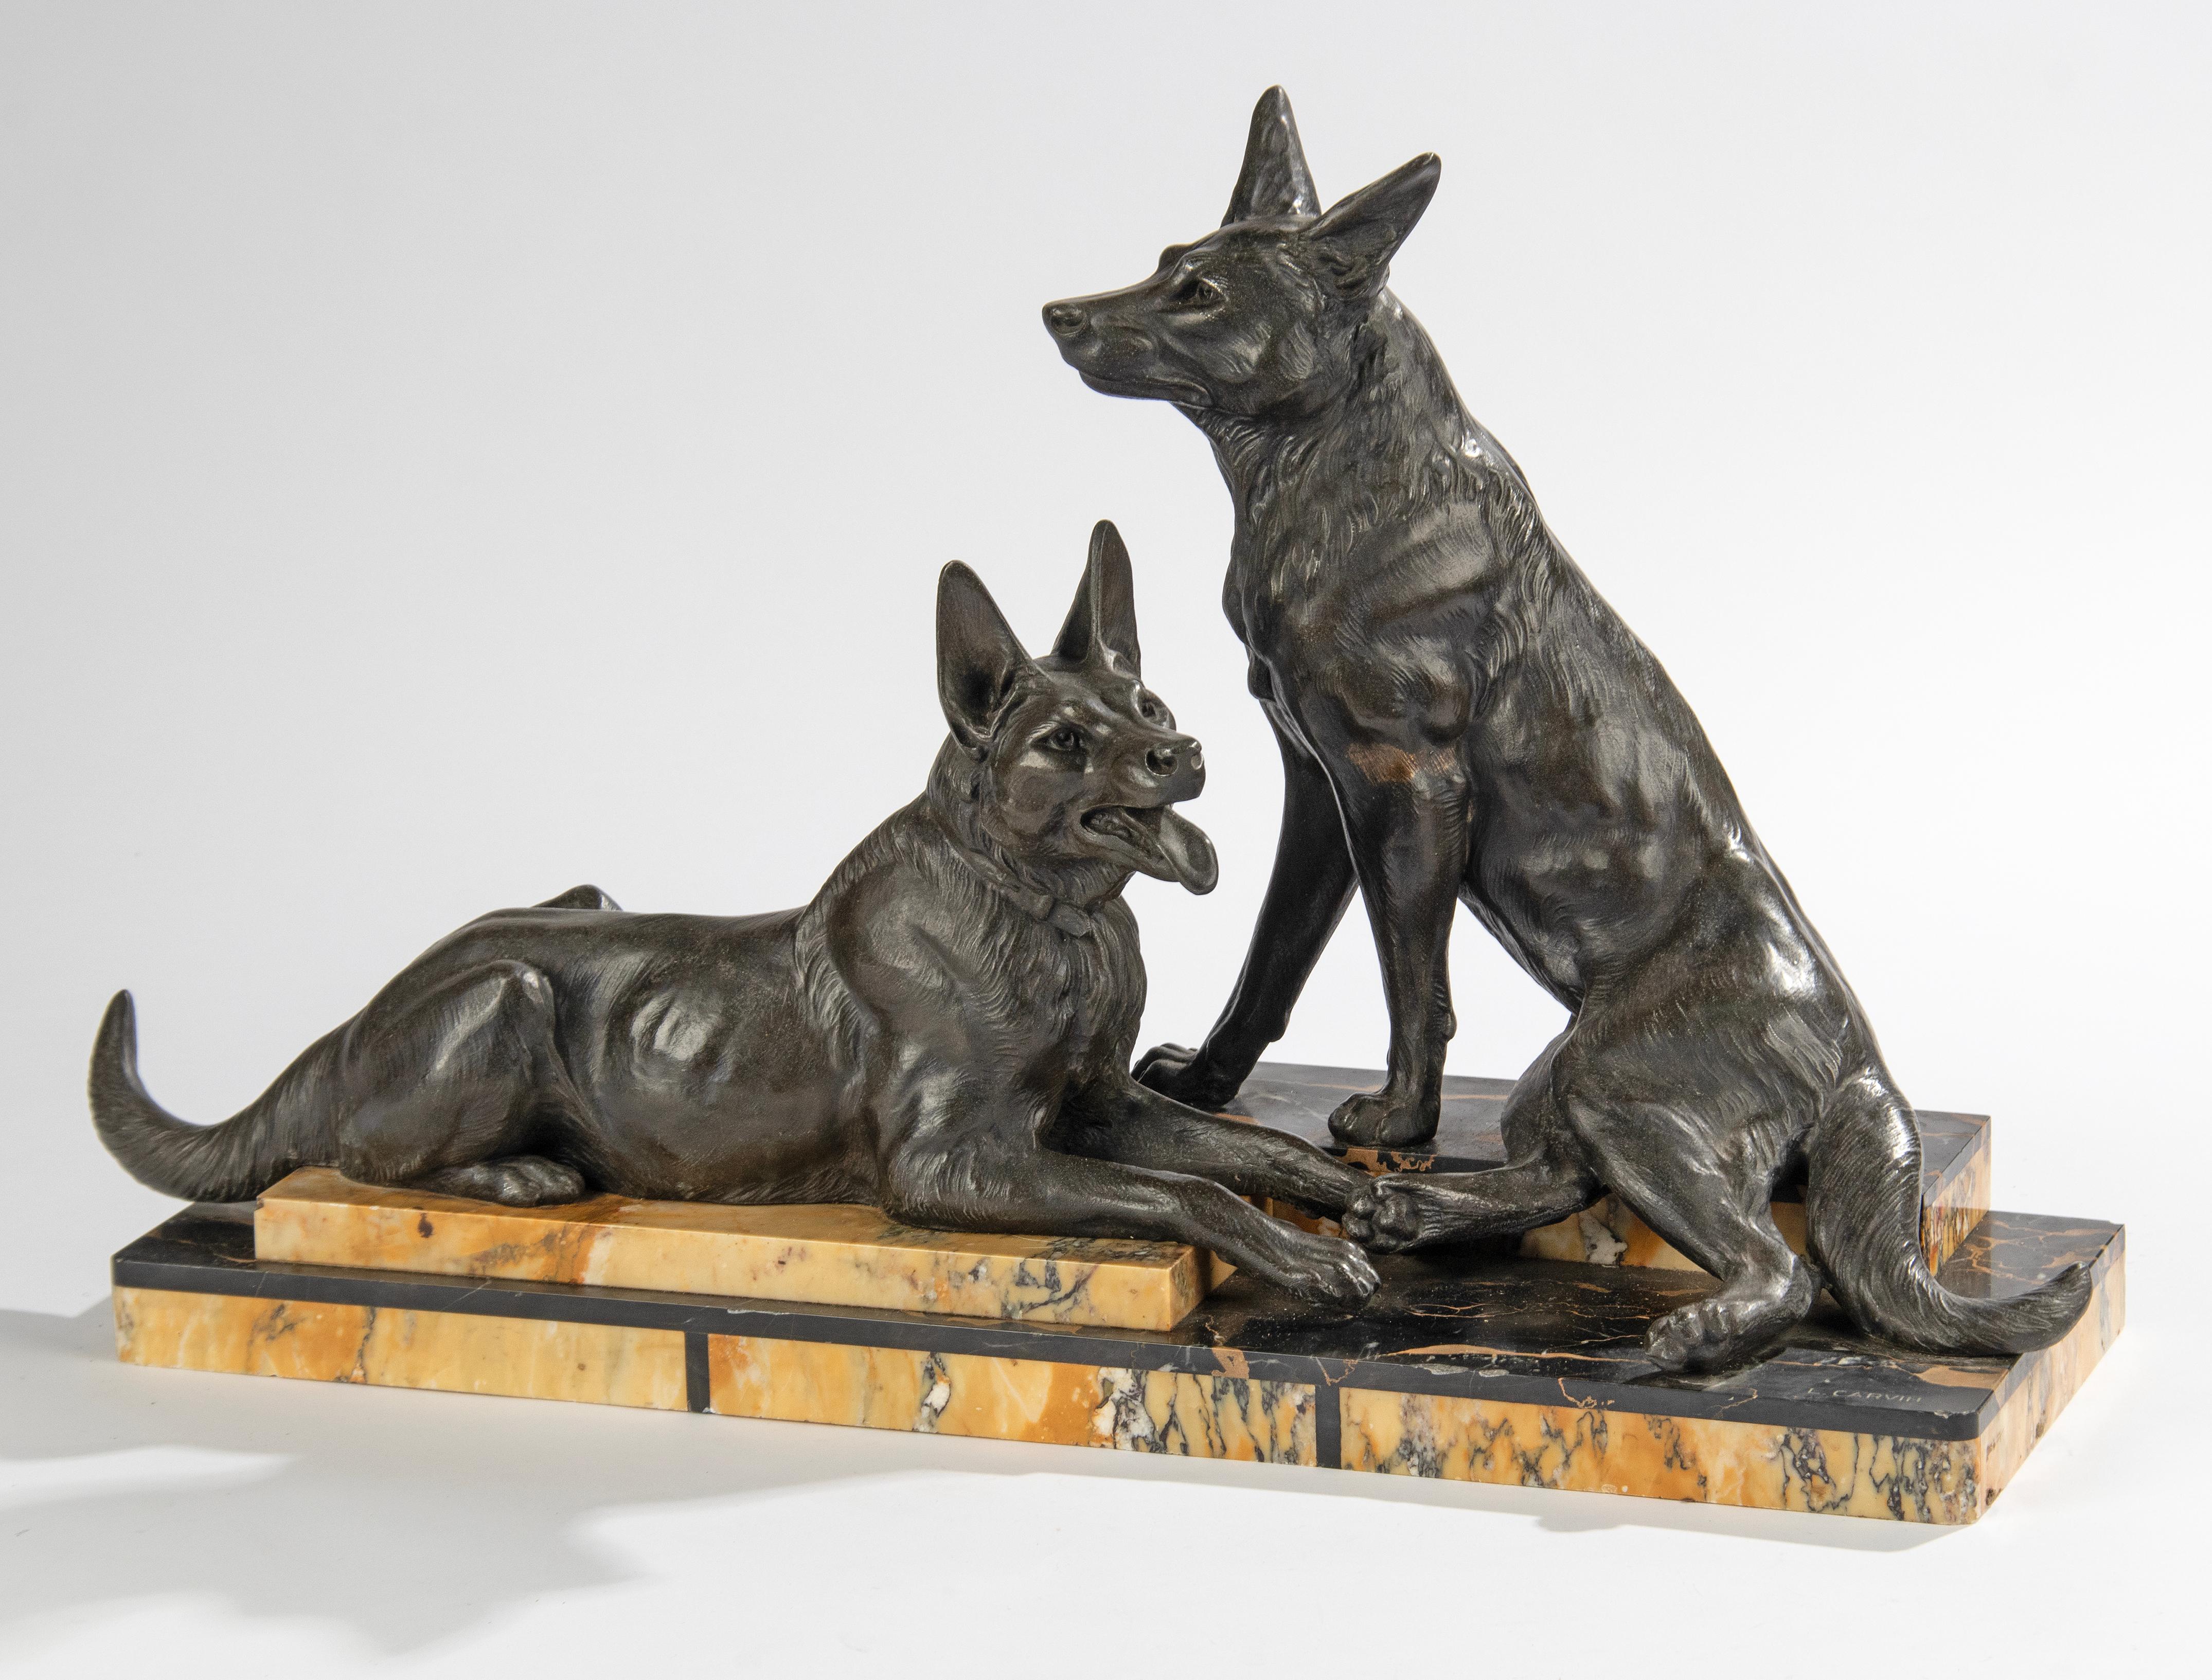 A huge sculpture of two German or Belgian Shepherds, made of patinated spelter (zinc alloy). On a marble plinth made of 'Porto Nero' marble and Sienna marble. Signed Carvin on the marble plinth. Made in France, around 1920-1930. Marble, patina and